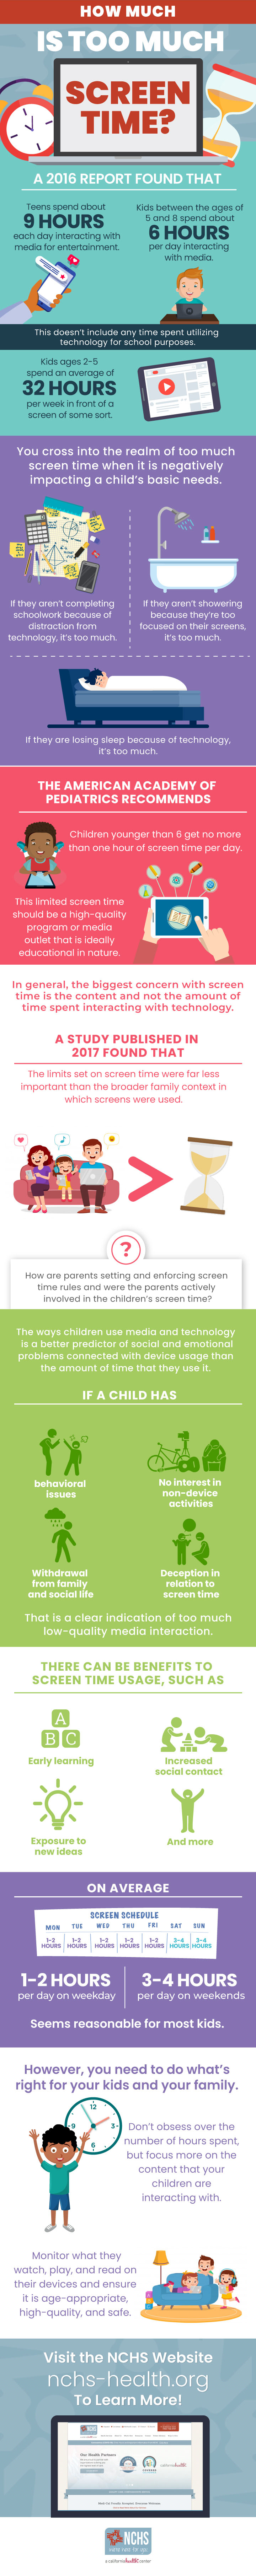 How Much is Too Much Screen Time?